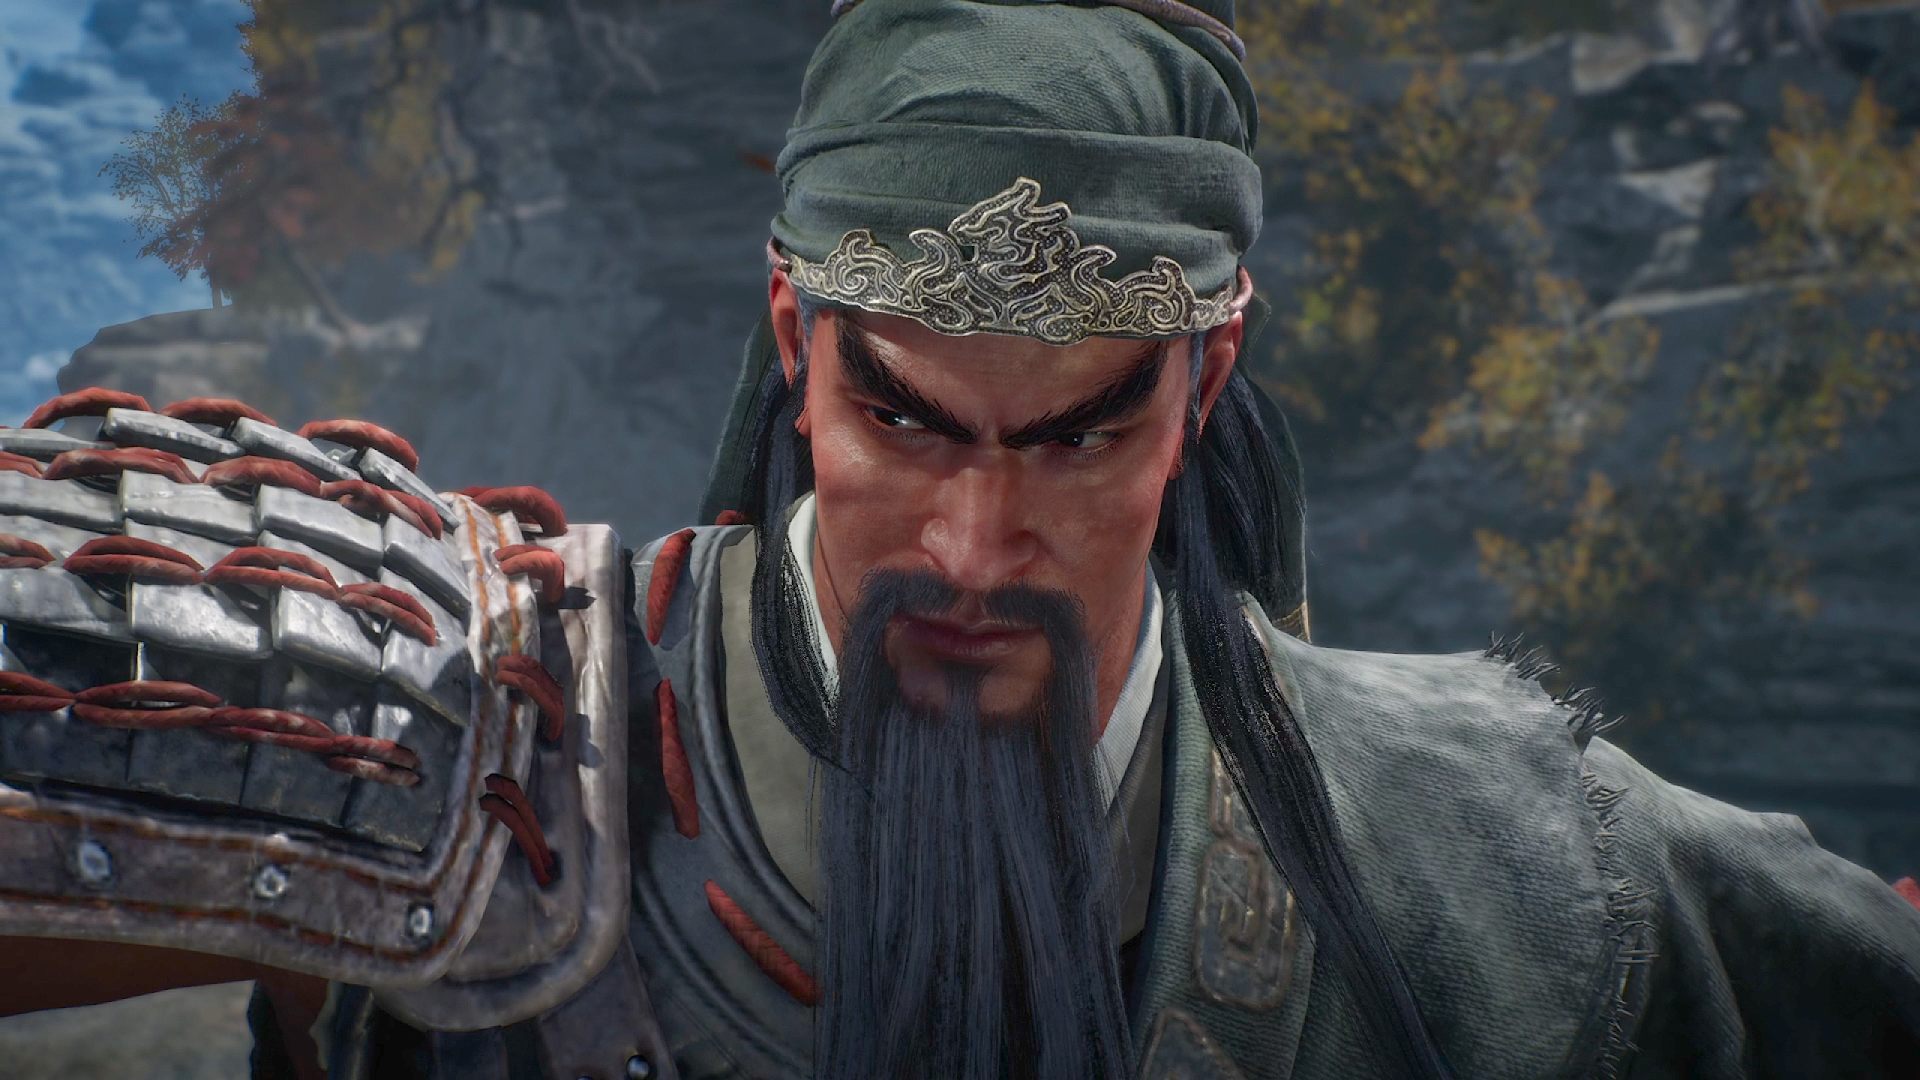 Wo Long Fallen Dynasty system requirements: picture of character Guan Yu